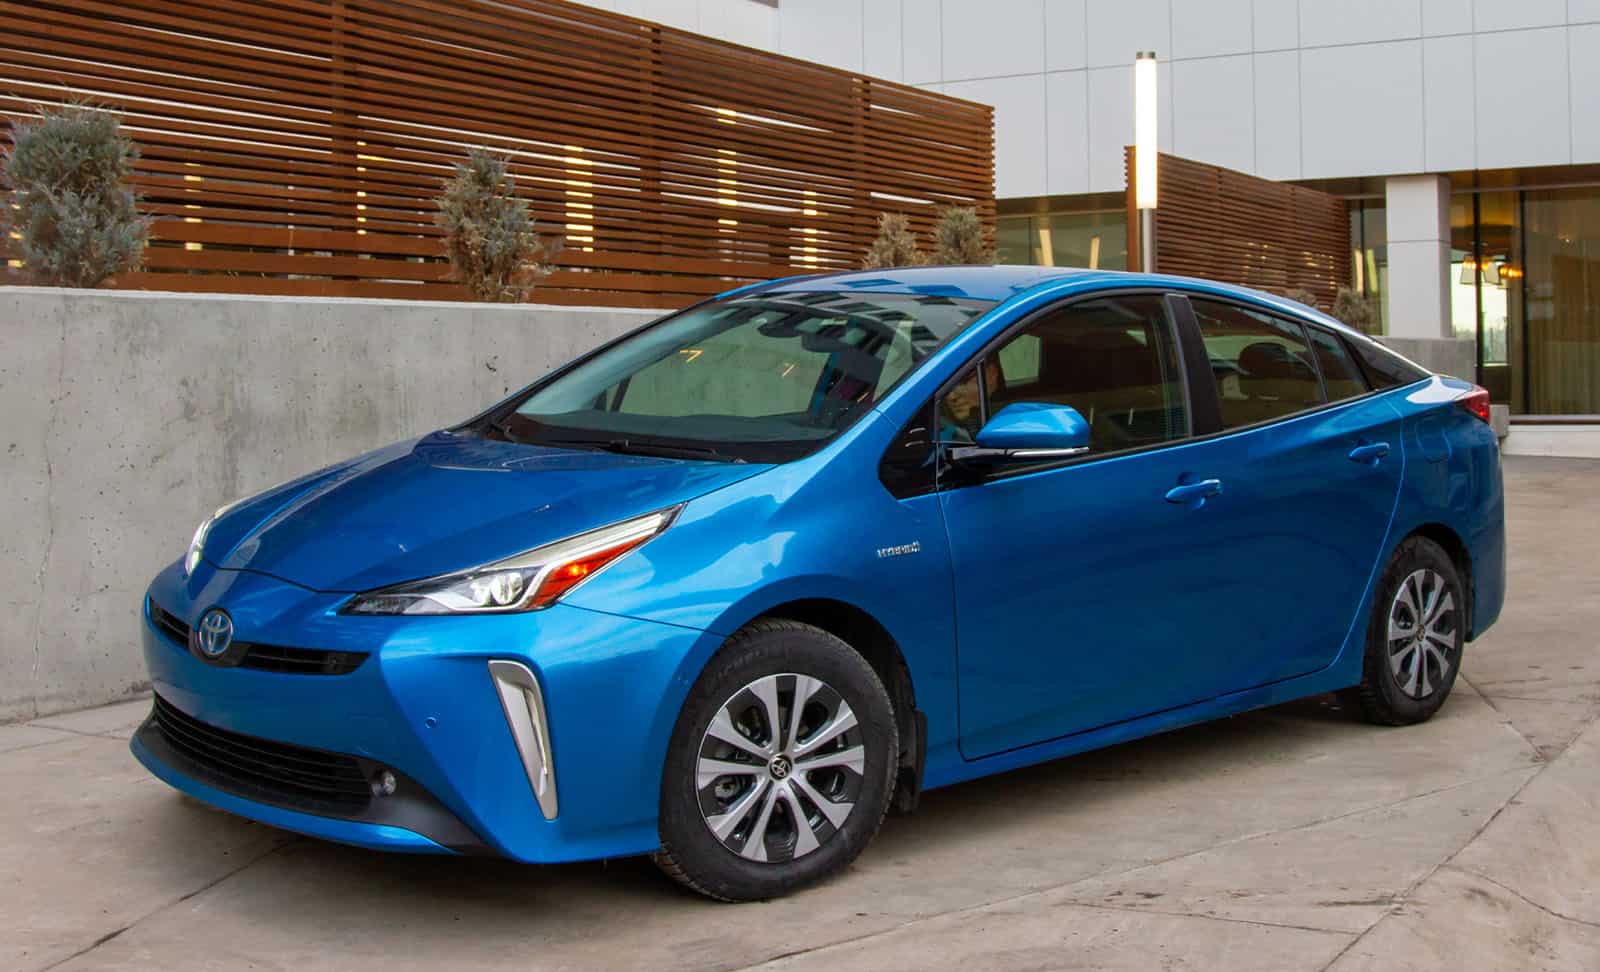 The 8 Best Hybrid Cars In Canada 22 Top Rated Models